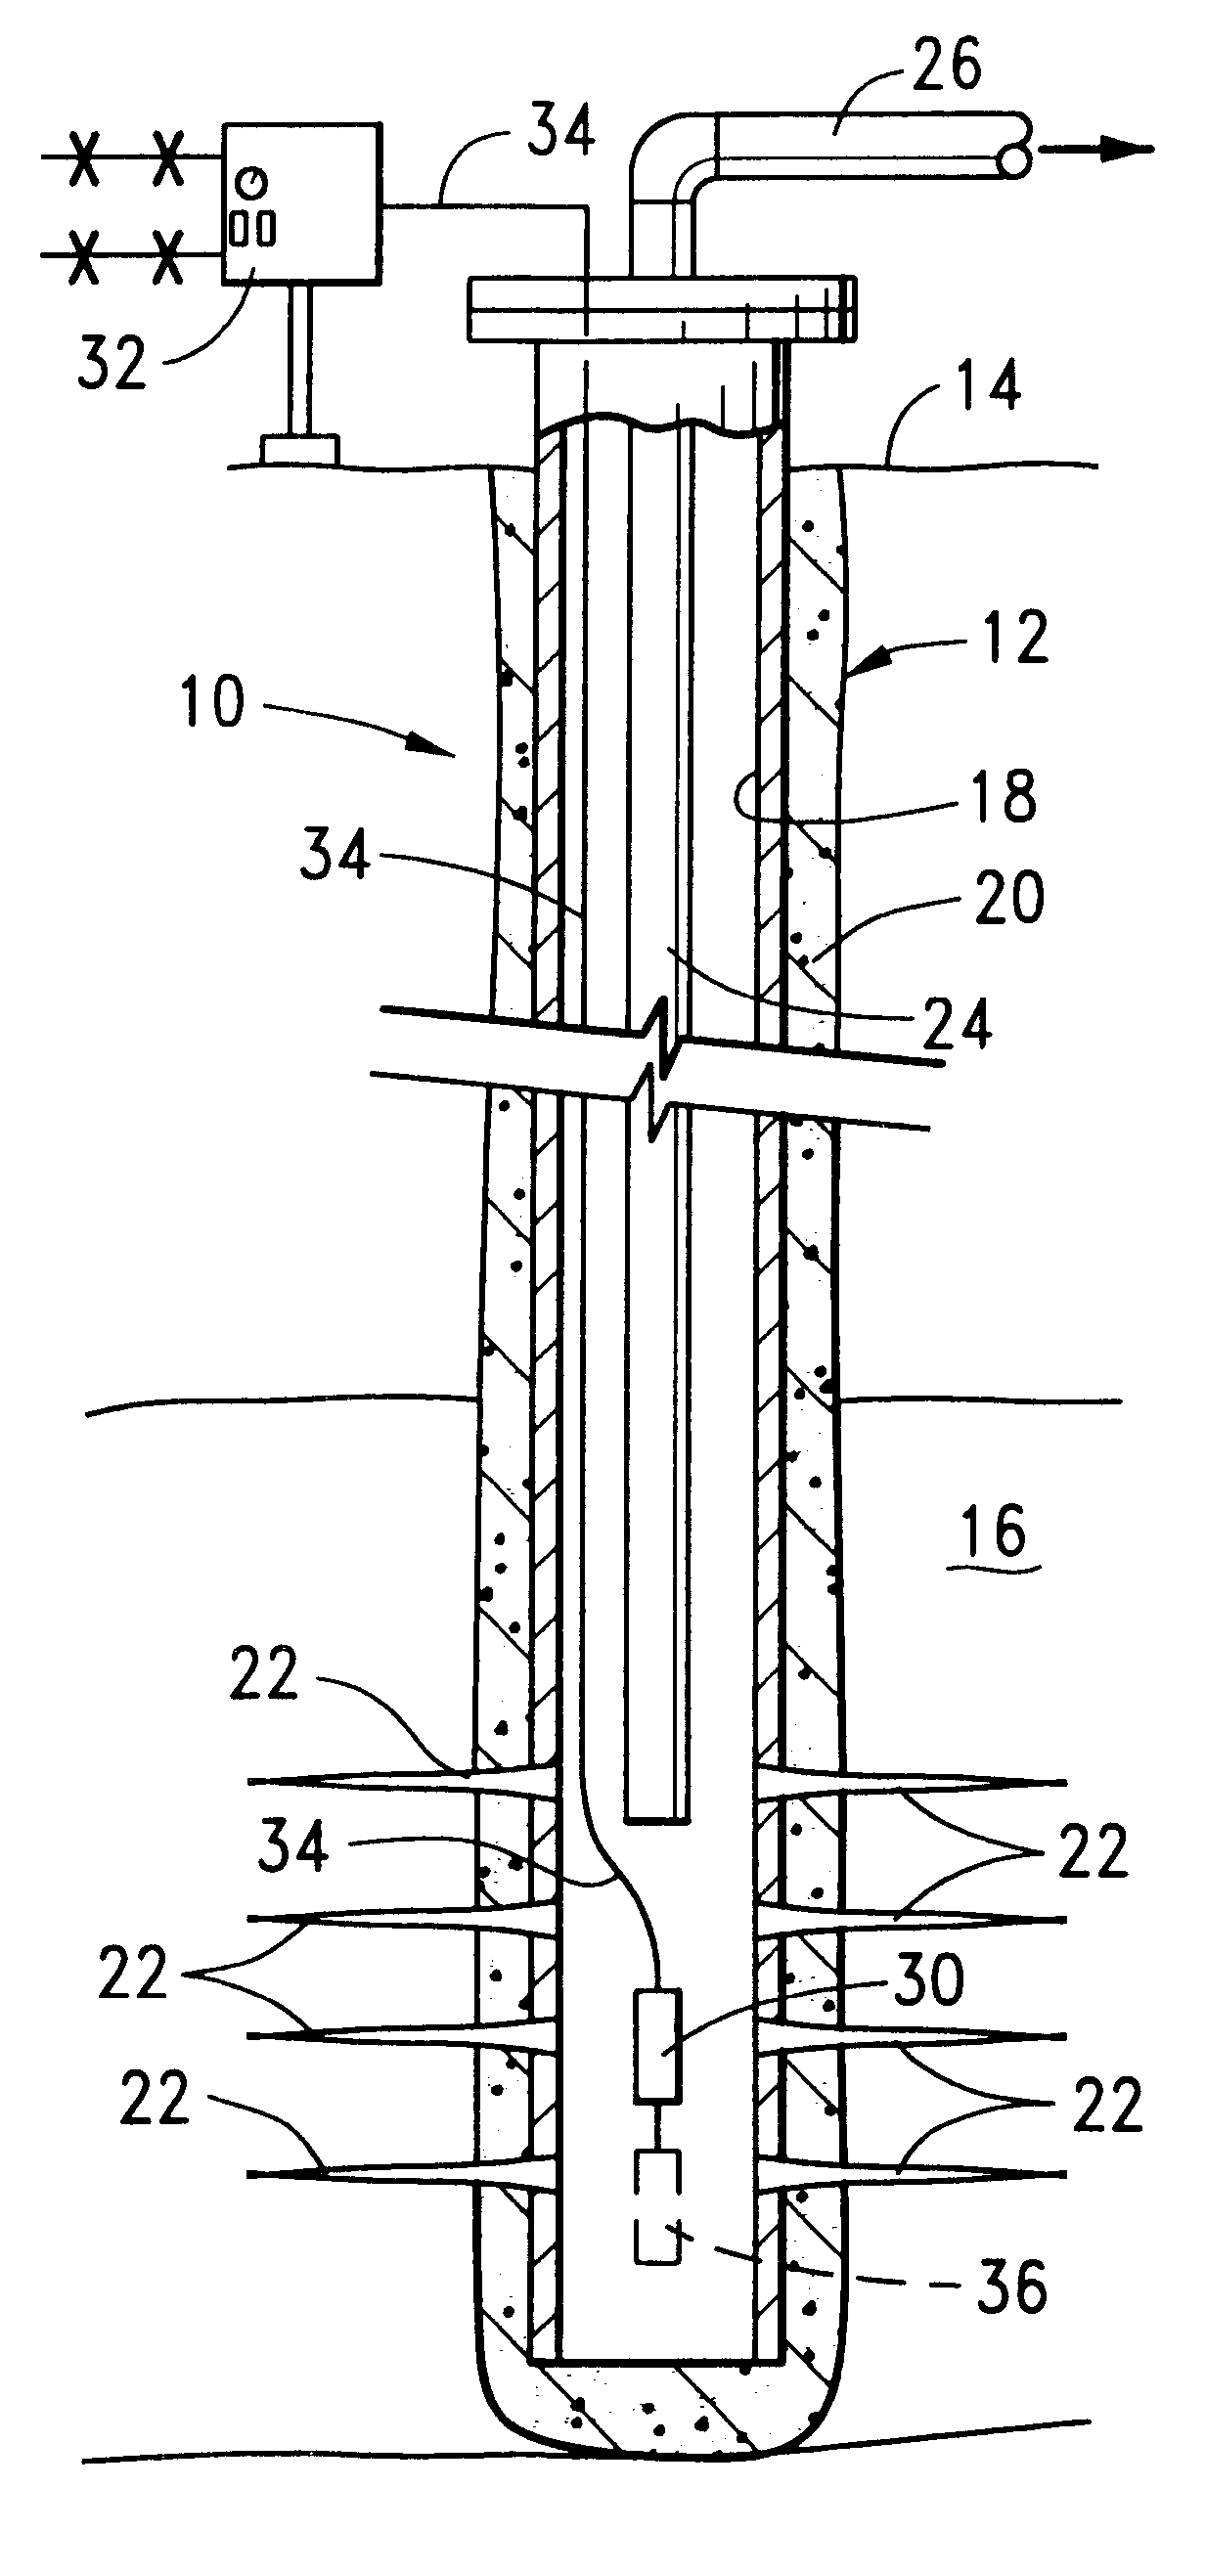 Methods and apparatus for enhancing well production using sonic energy